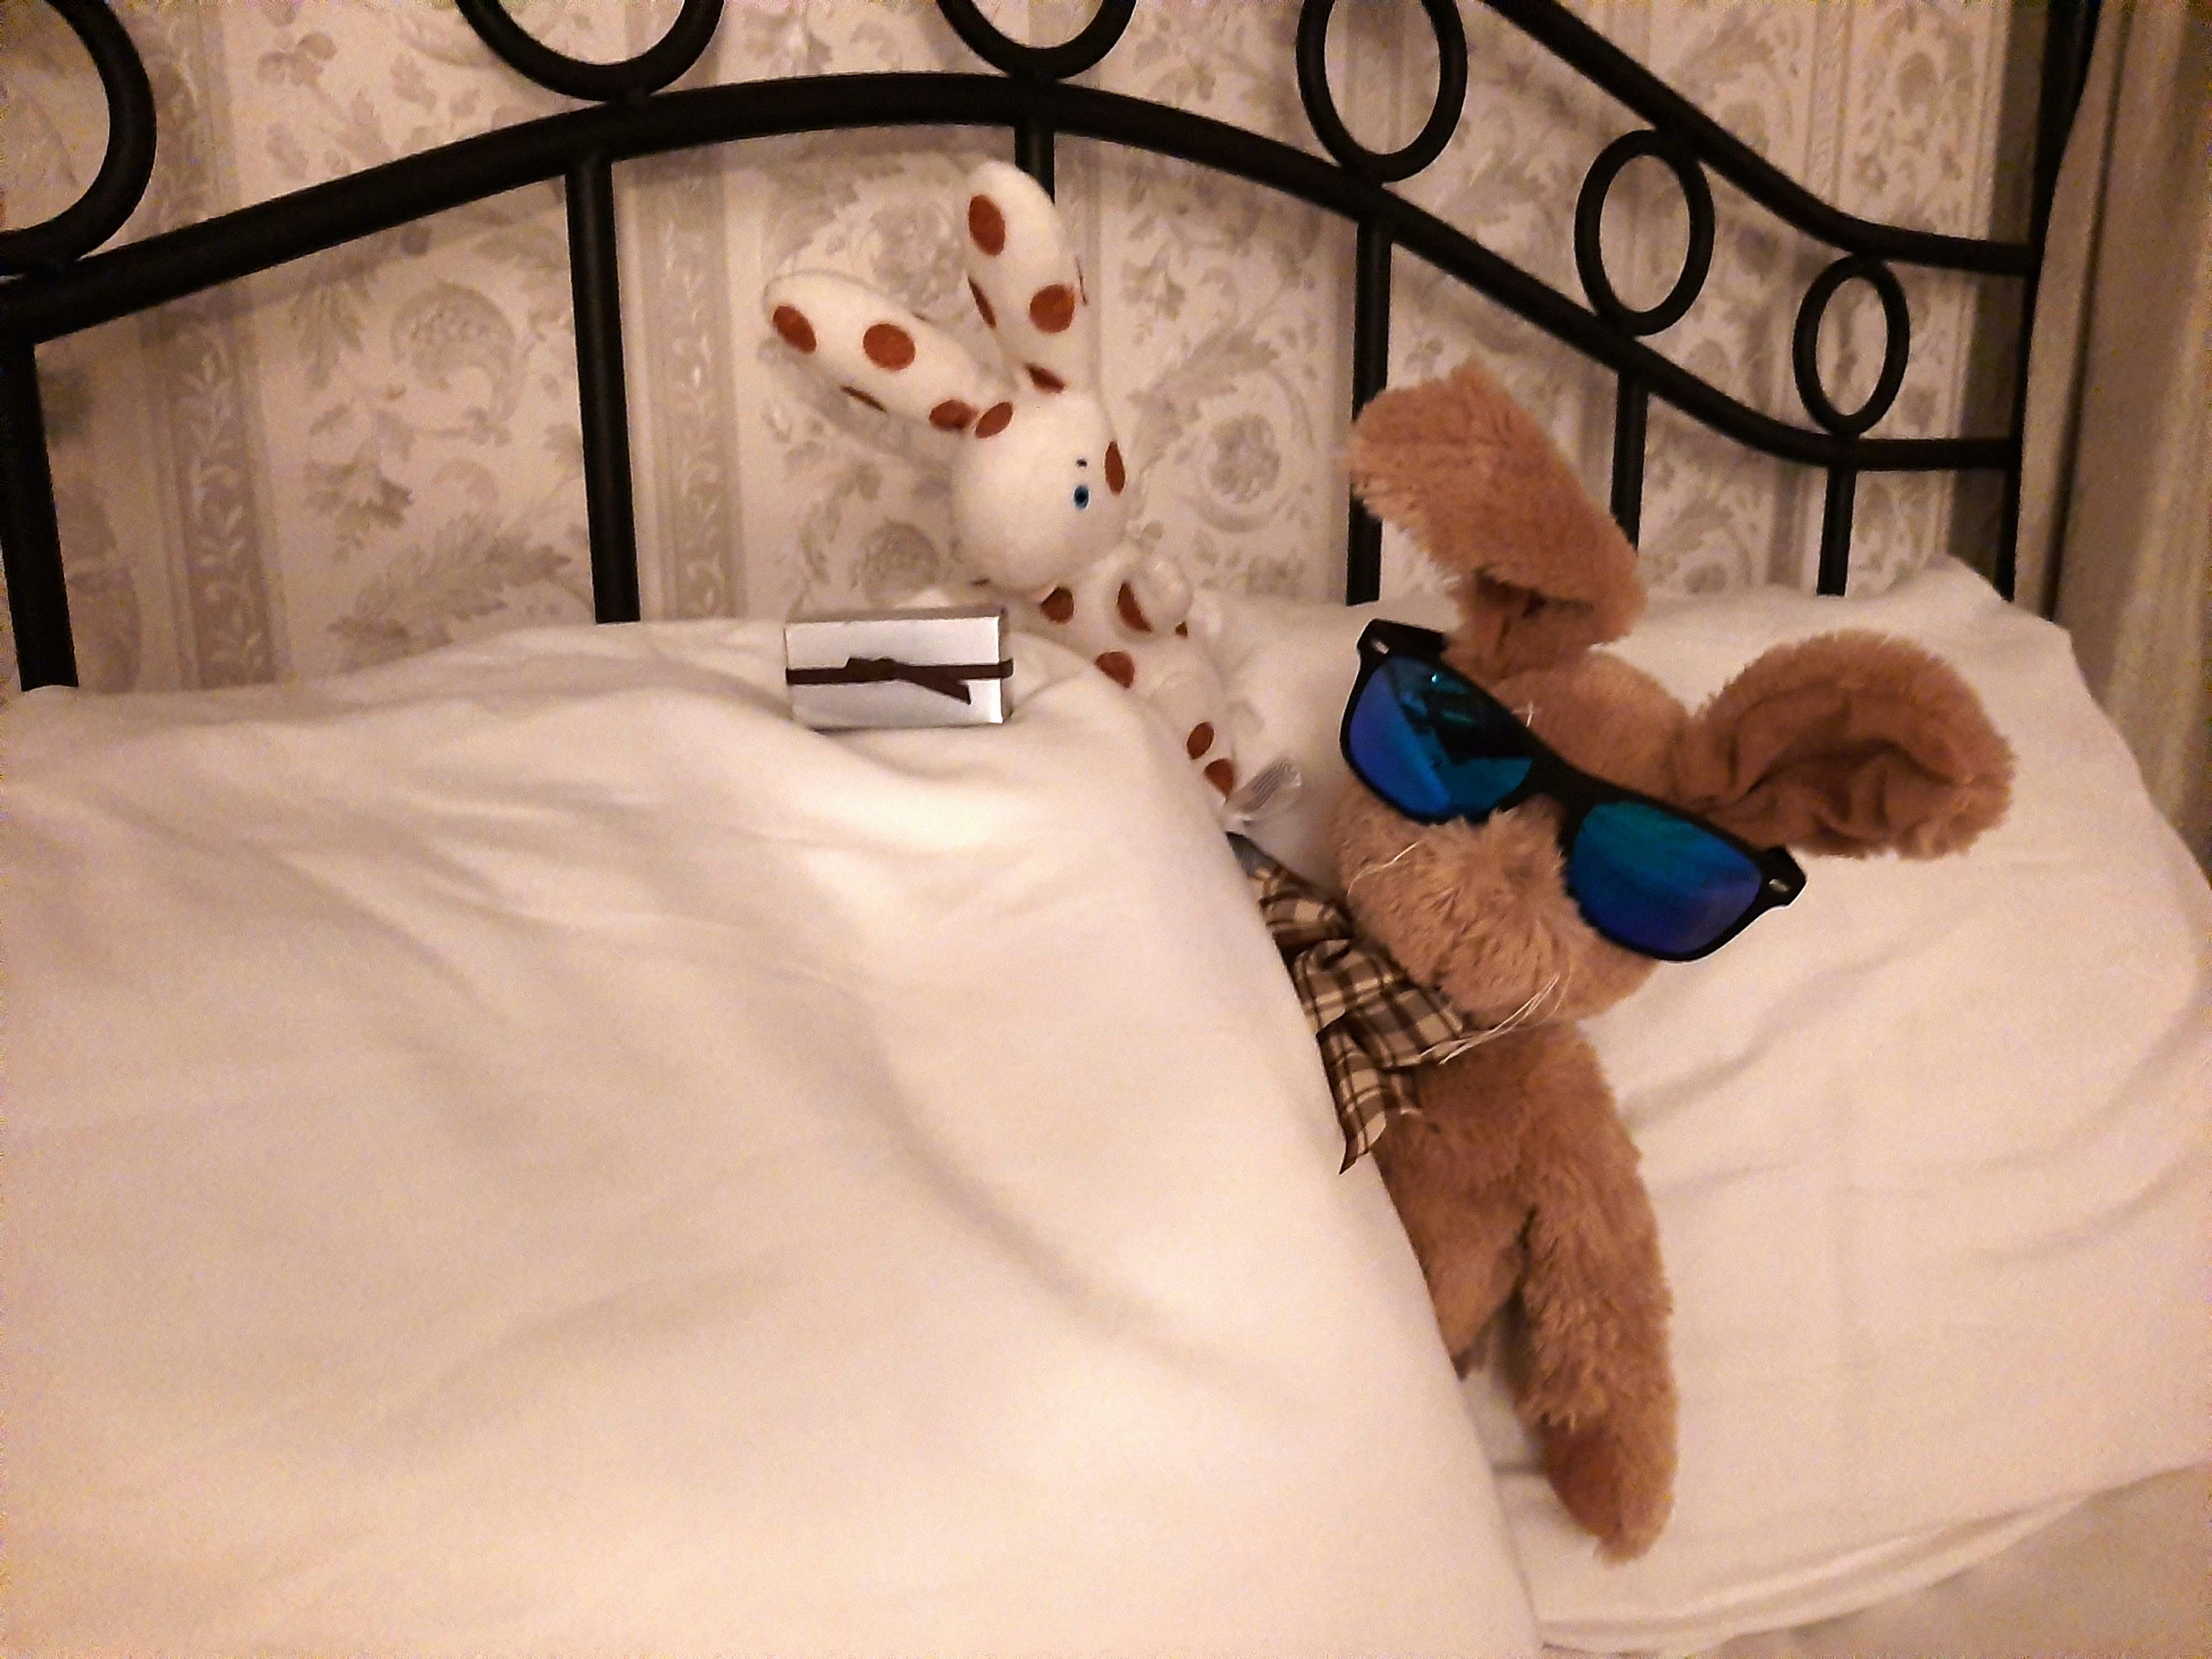 A stuffed rabbit with sunglasses lie inside the bed